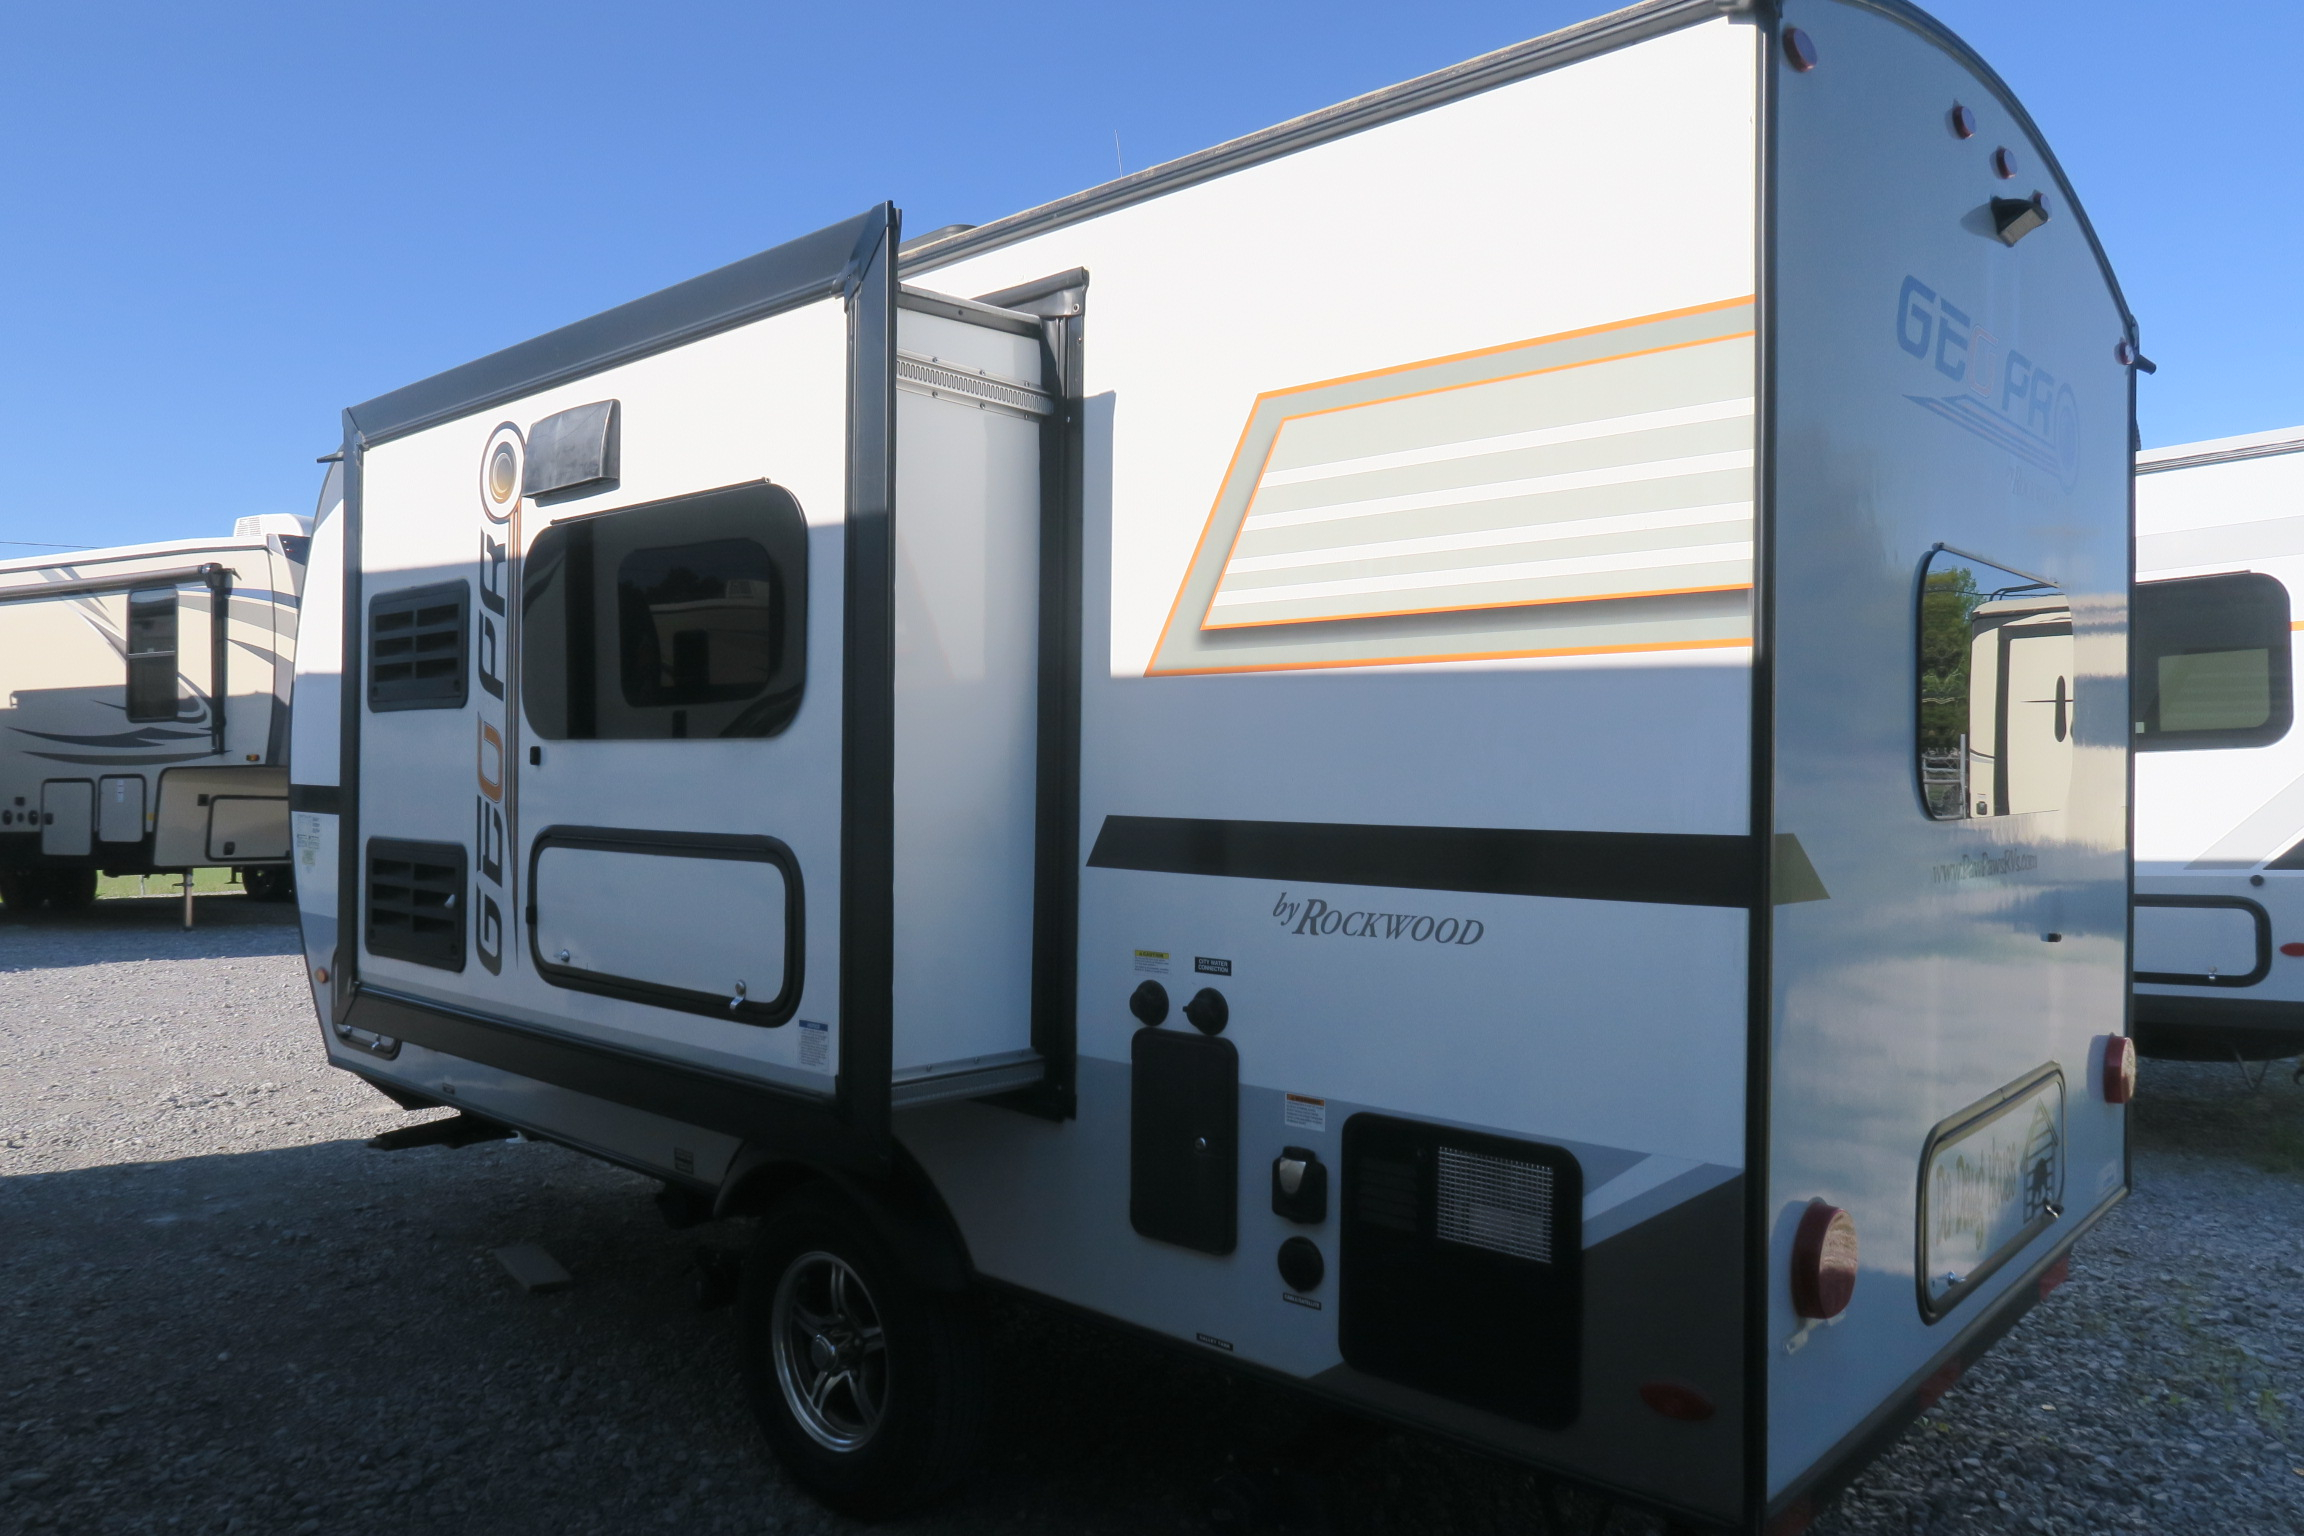 USED 2019 ROCKWOOD GEO PRO 16BH - Overview | Berryland Campers Rockwood Geo Pro 16bh For Sale Near Me